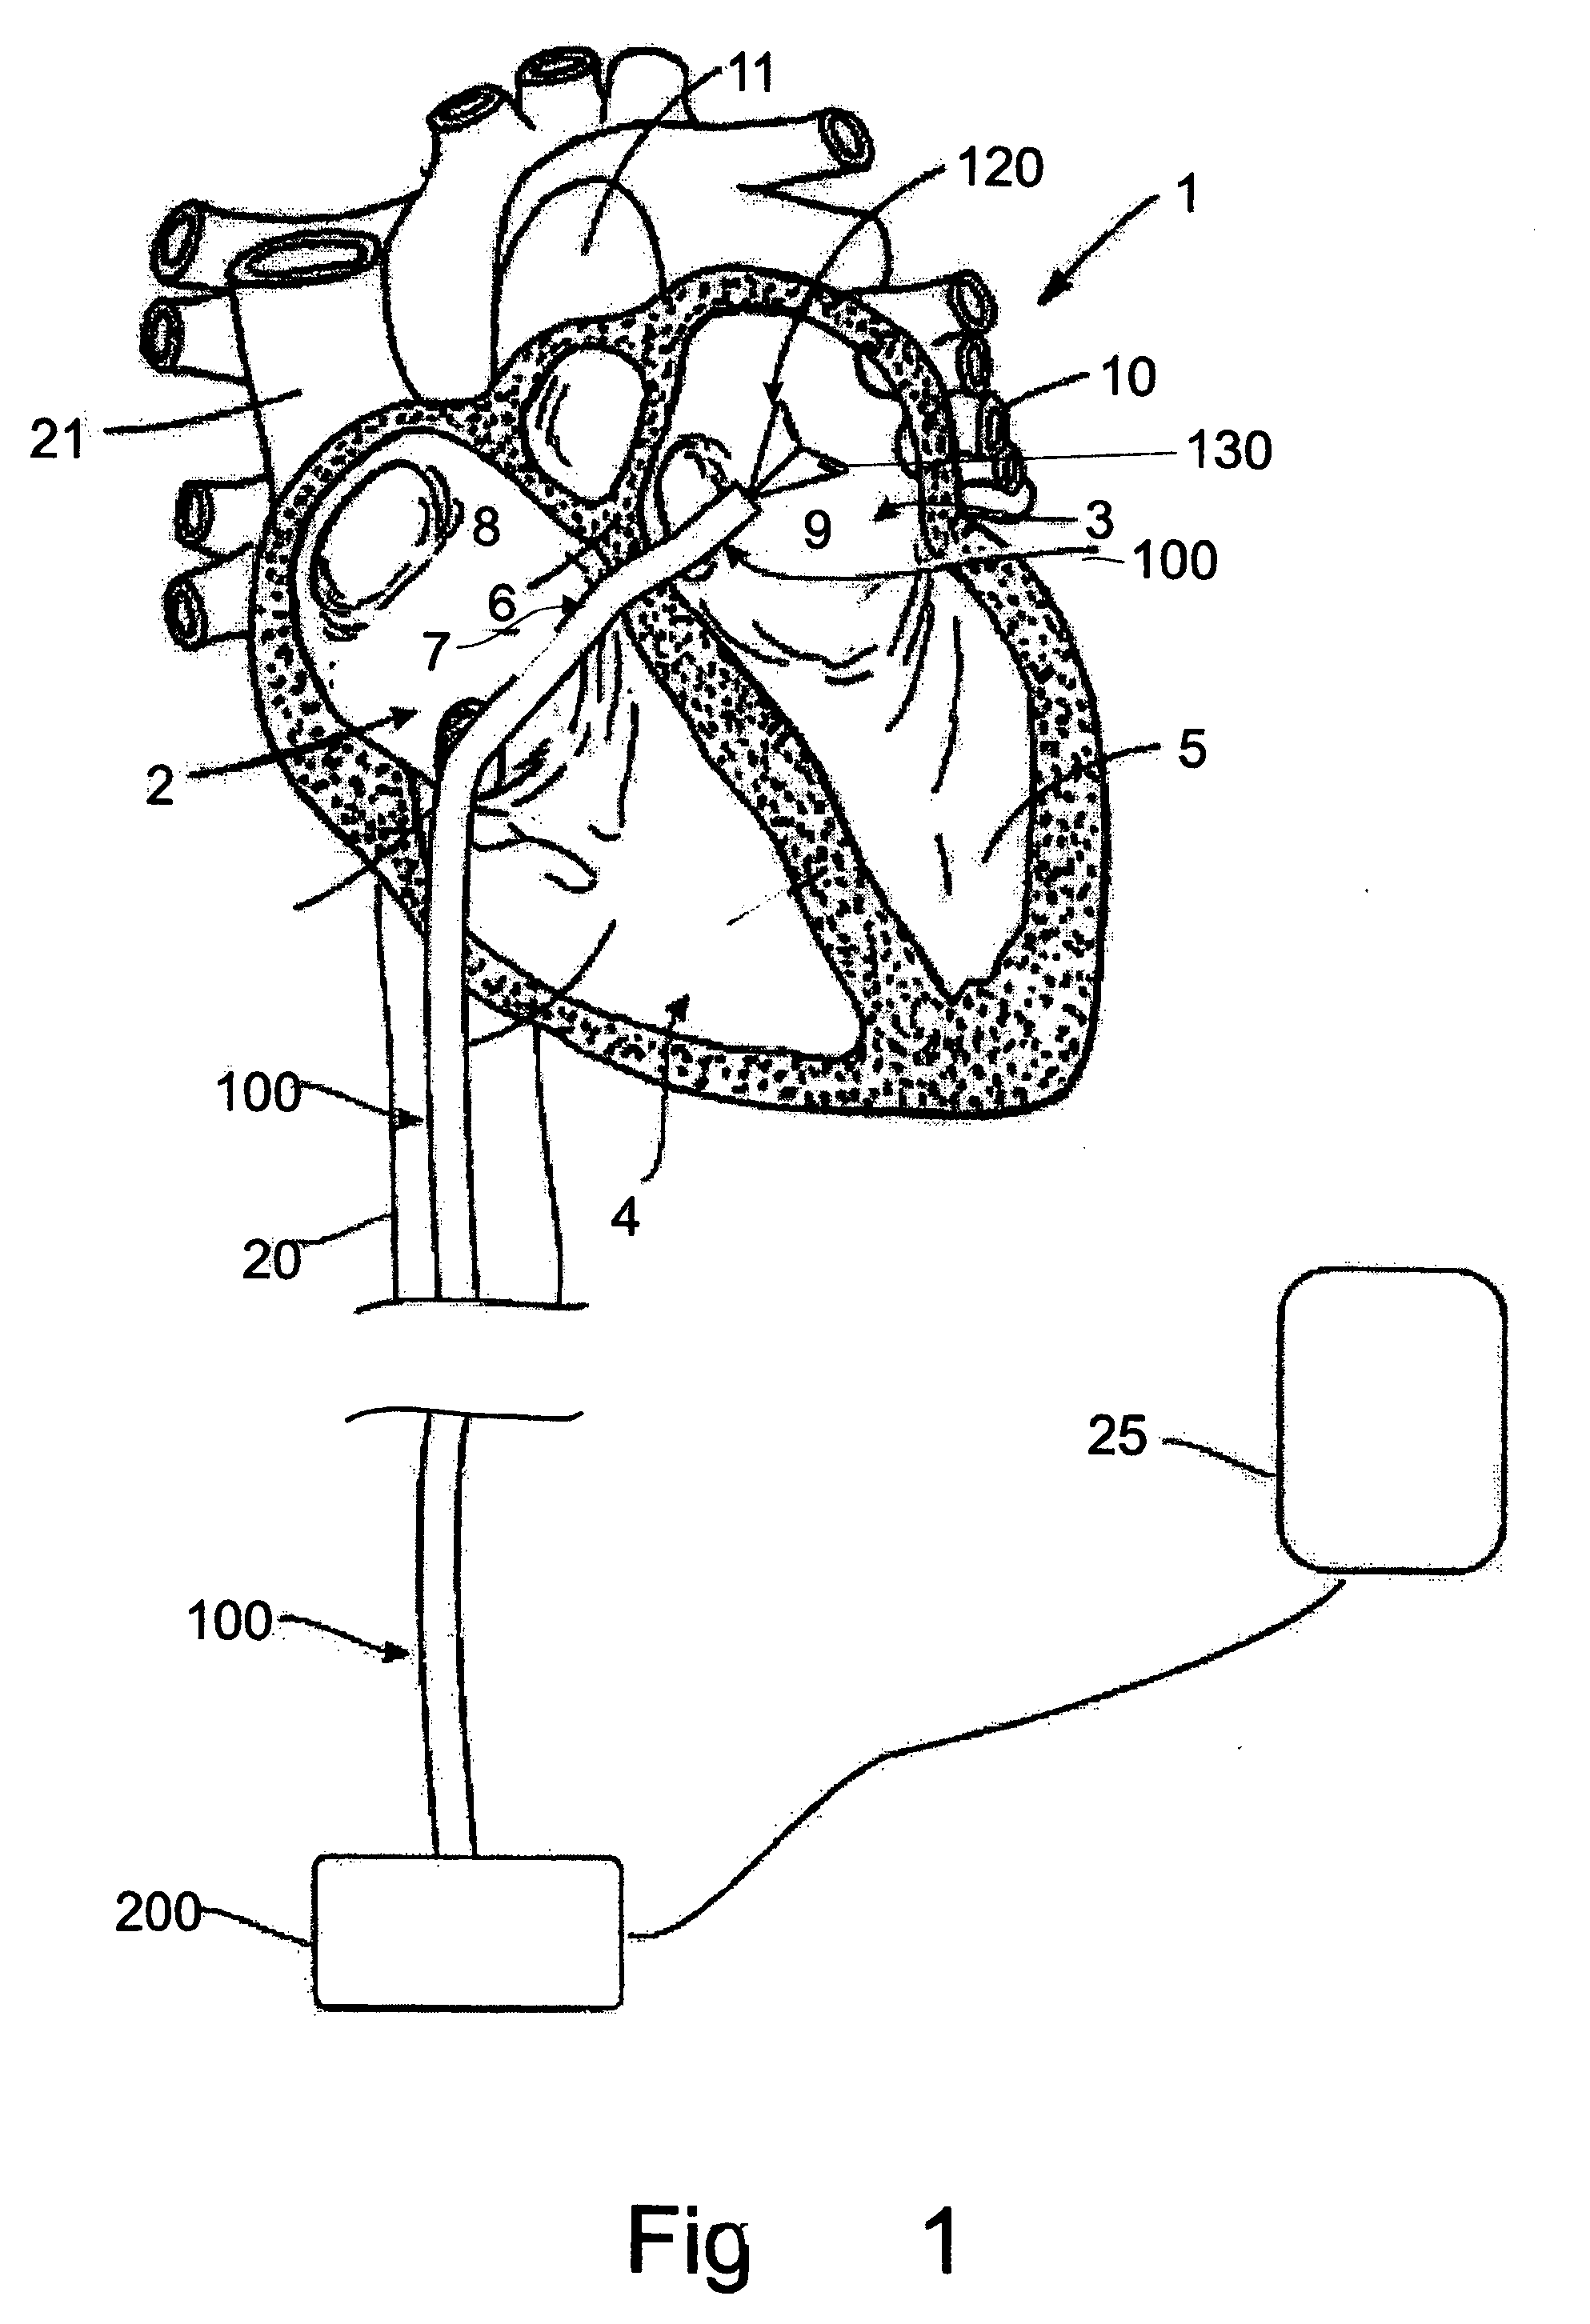 User interface for tissue ablation system